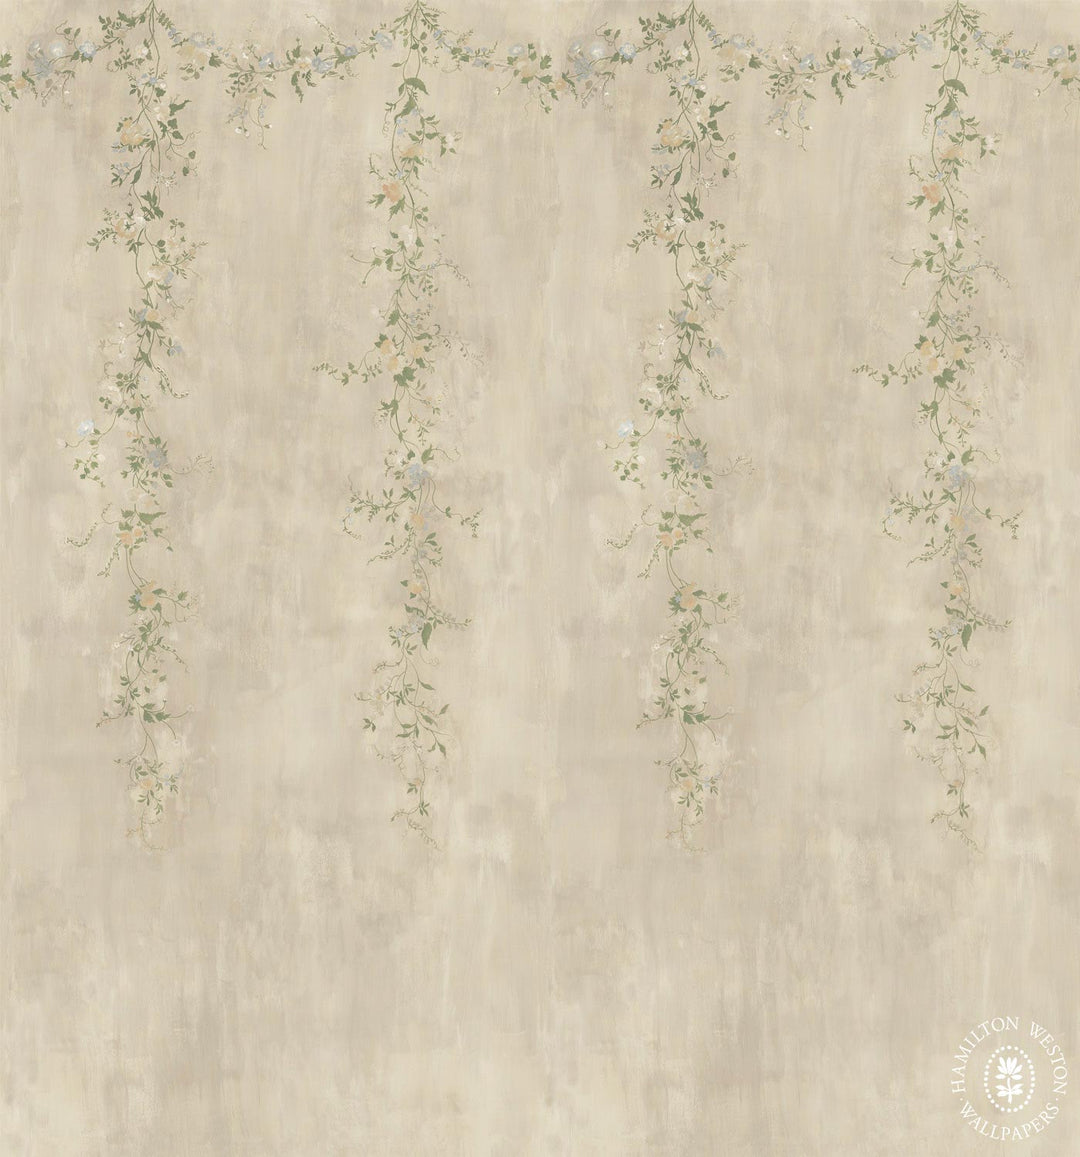 Floral-Roberts-Hamilton-Weston-wallpaper-trailing-flowers-Garland-hand-illustrated-panel-walls-mural-floral-Garland-painterly-stone-03